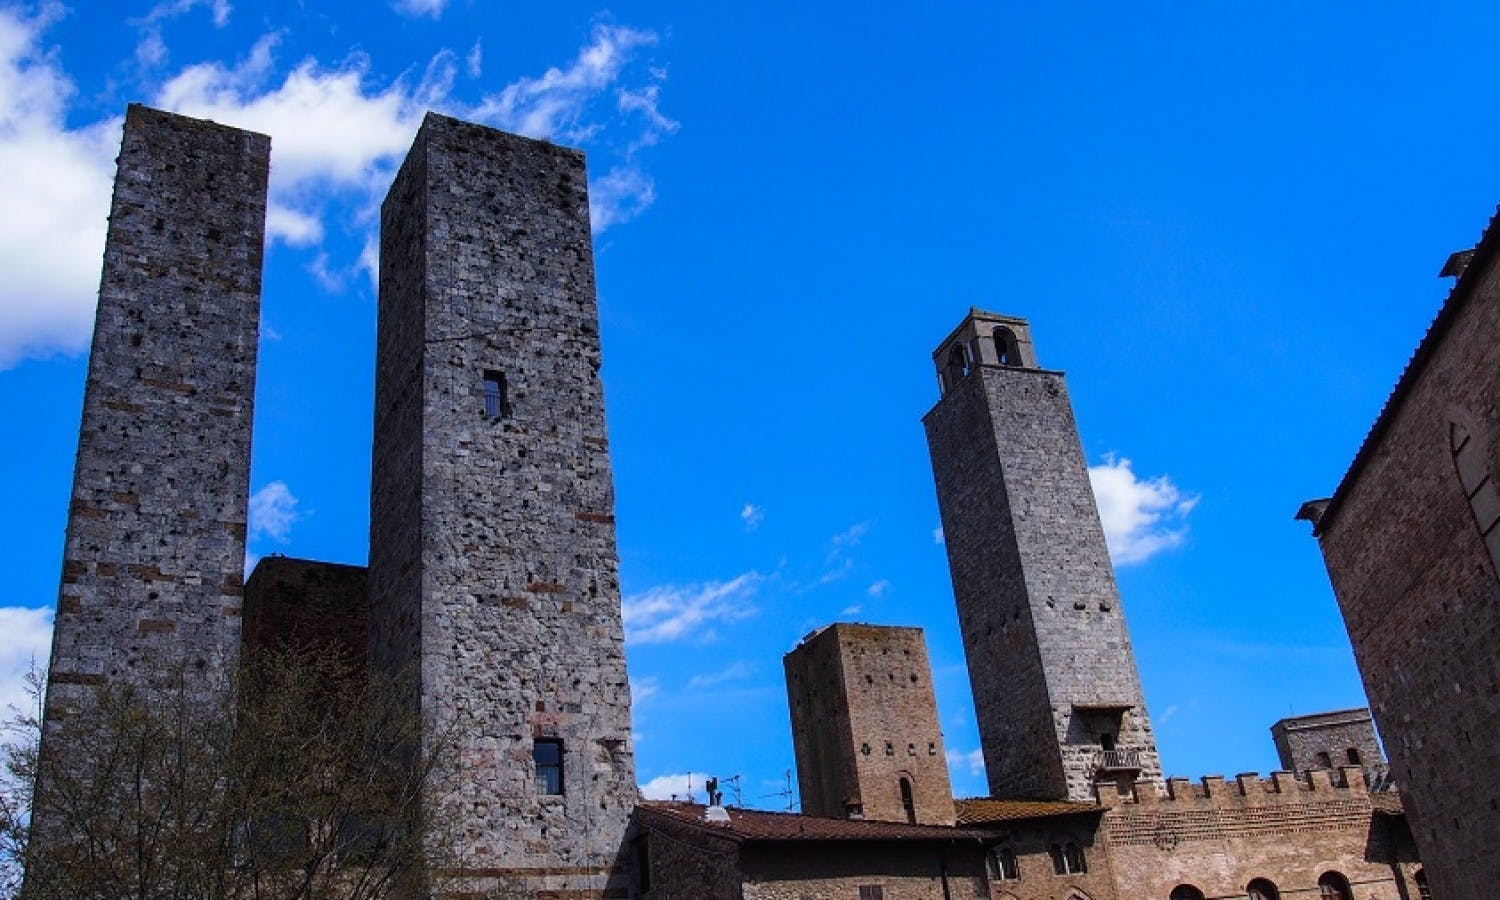 pisa-siena-san-gimignano-and-chianti-guided-tour-with-lunch-and-wine-tasting_header-20333.jpeg